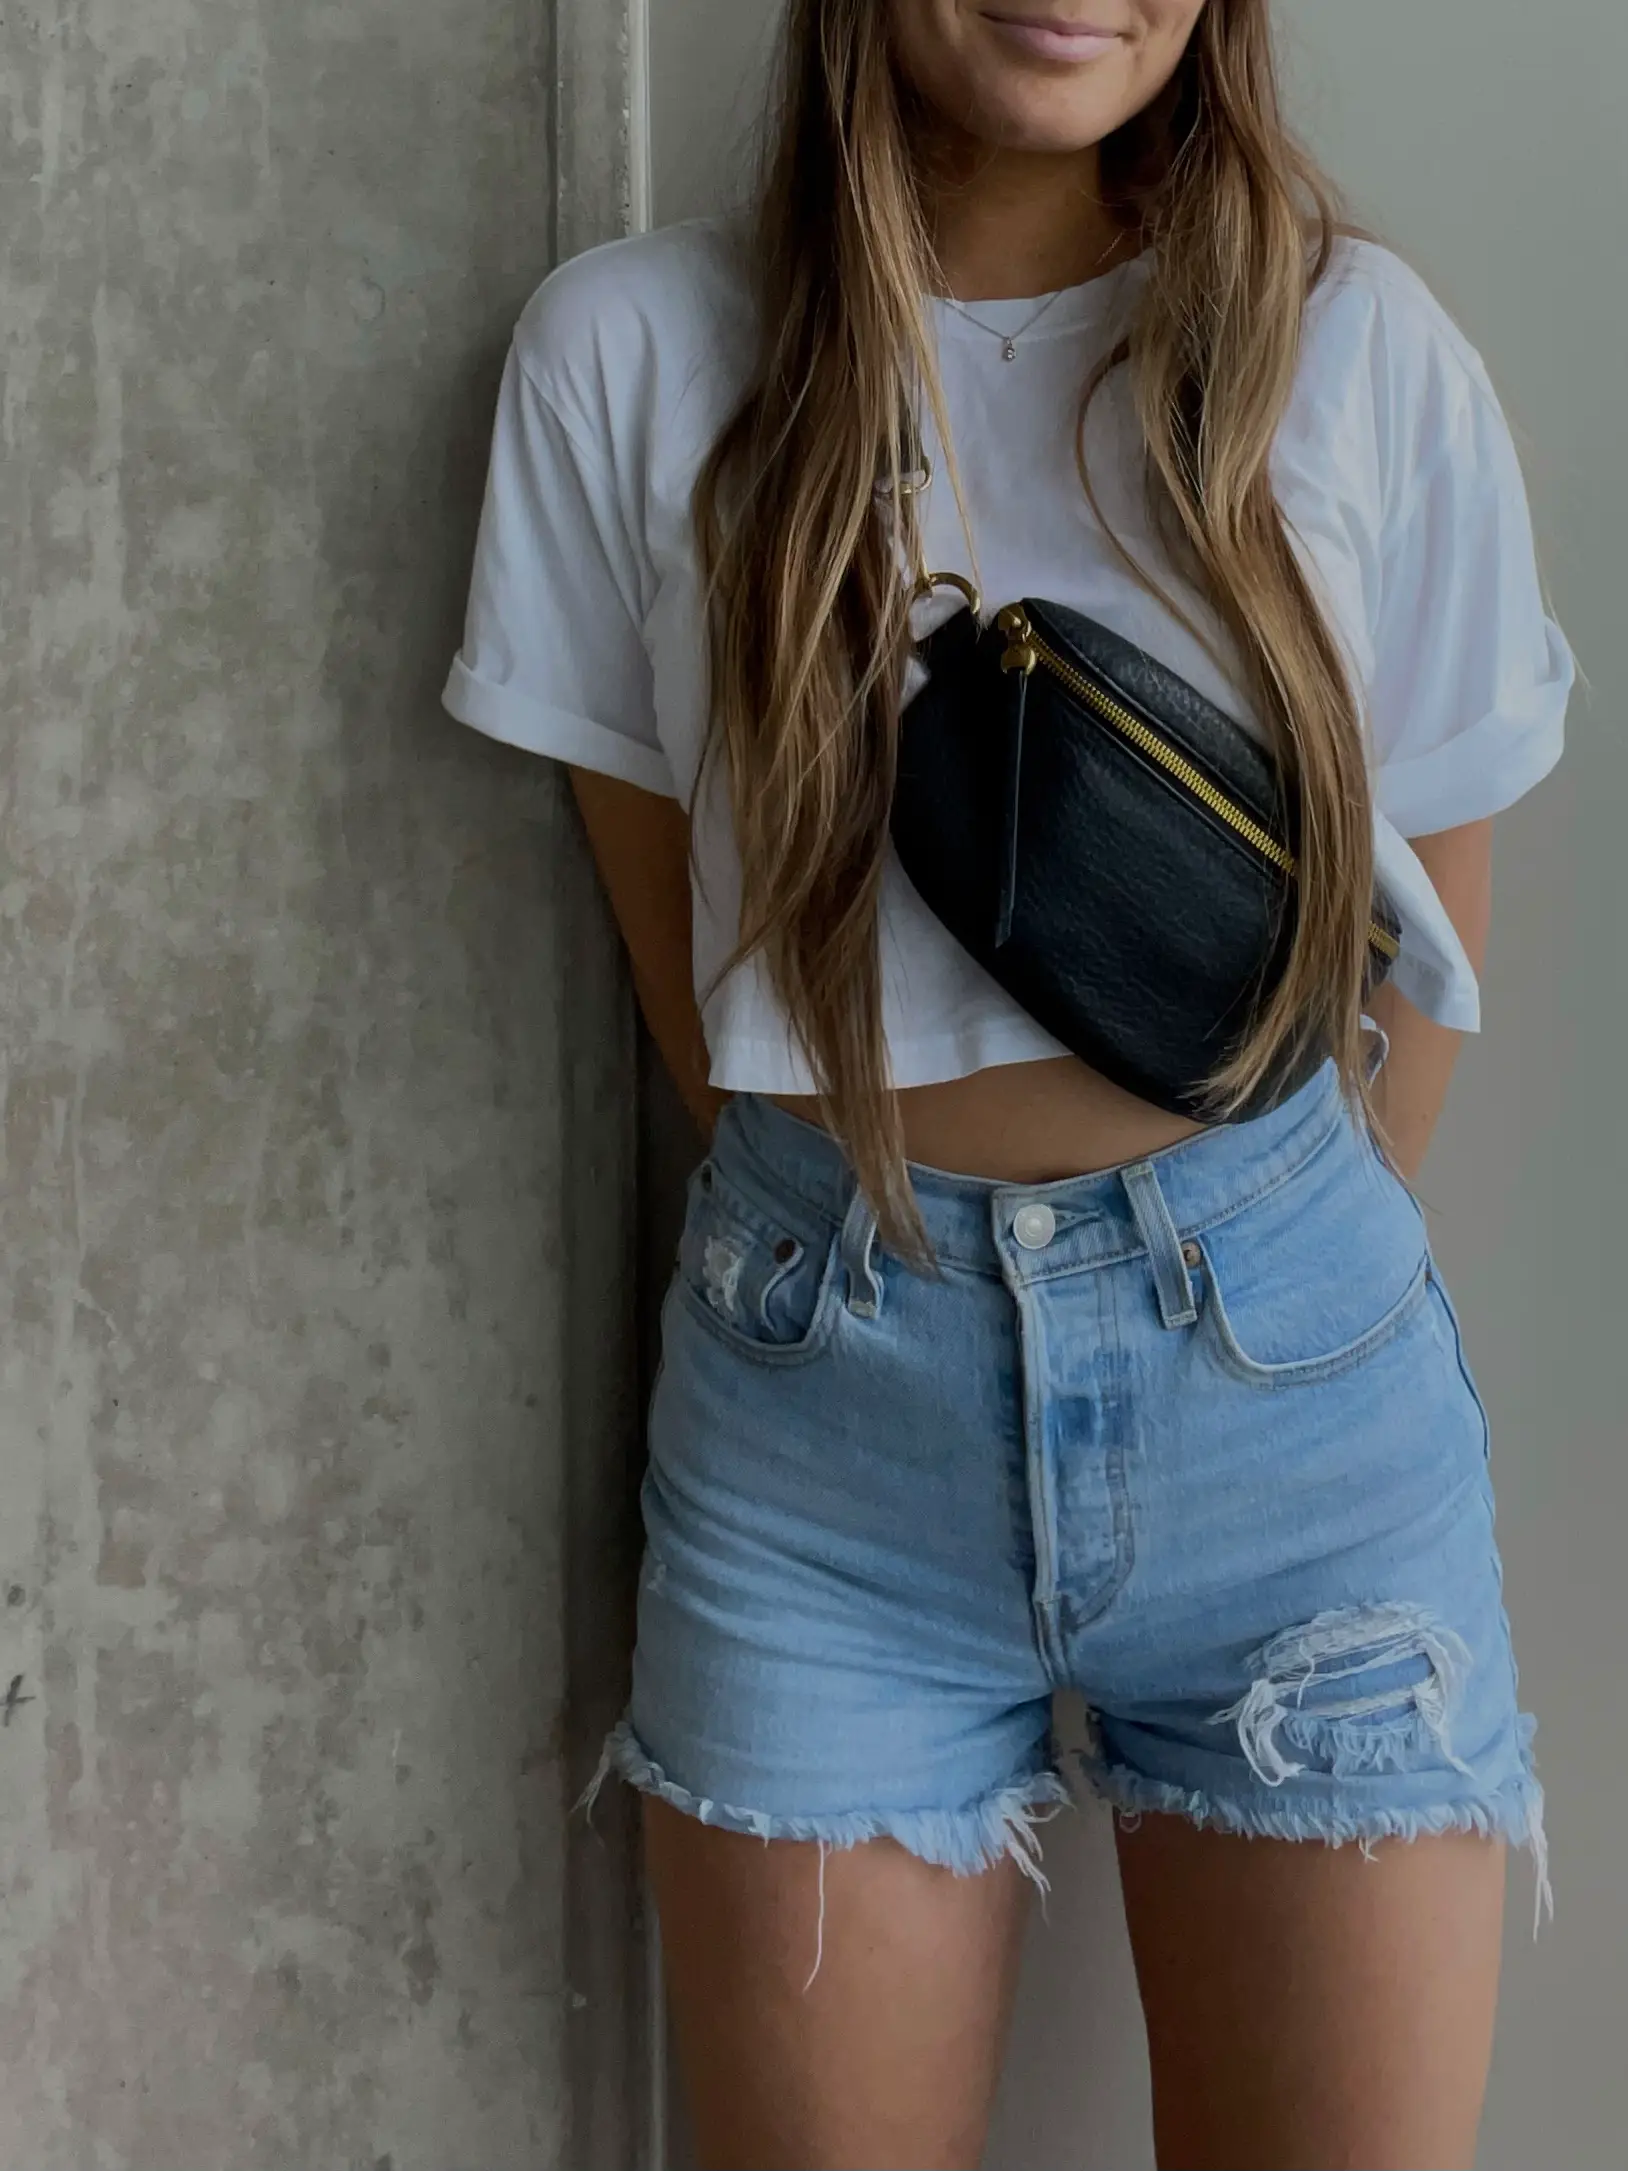 how to style denim shorts 1/5👨👟